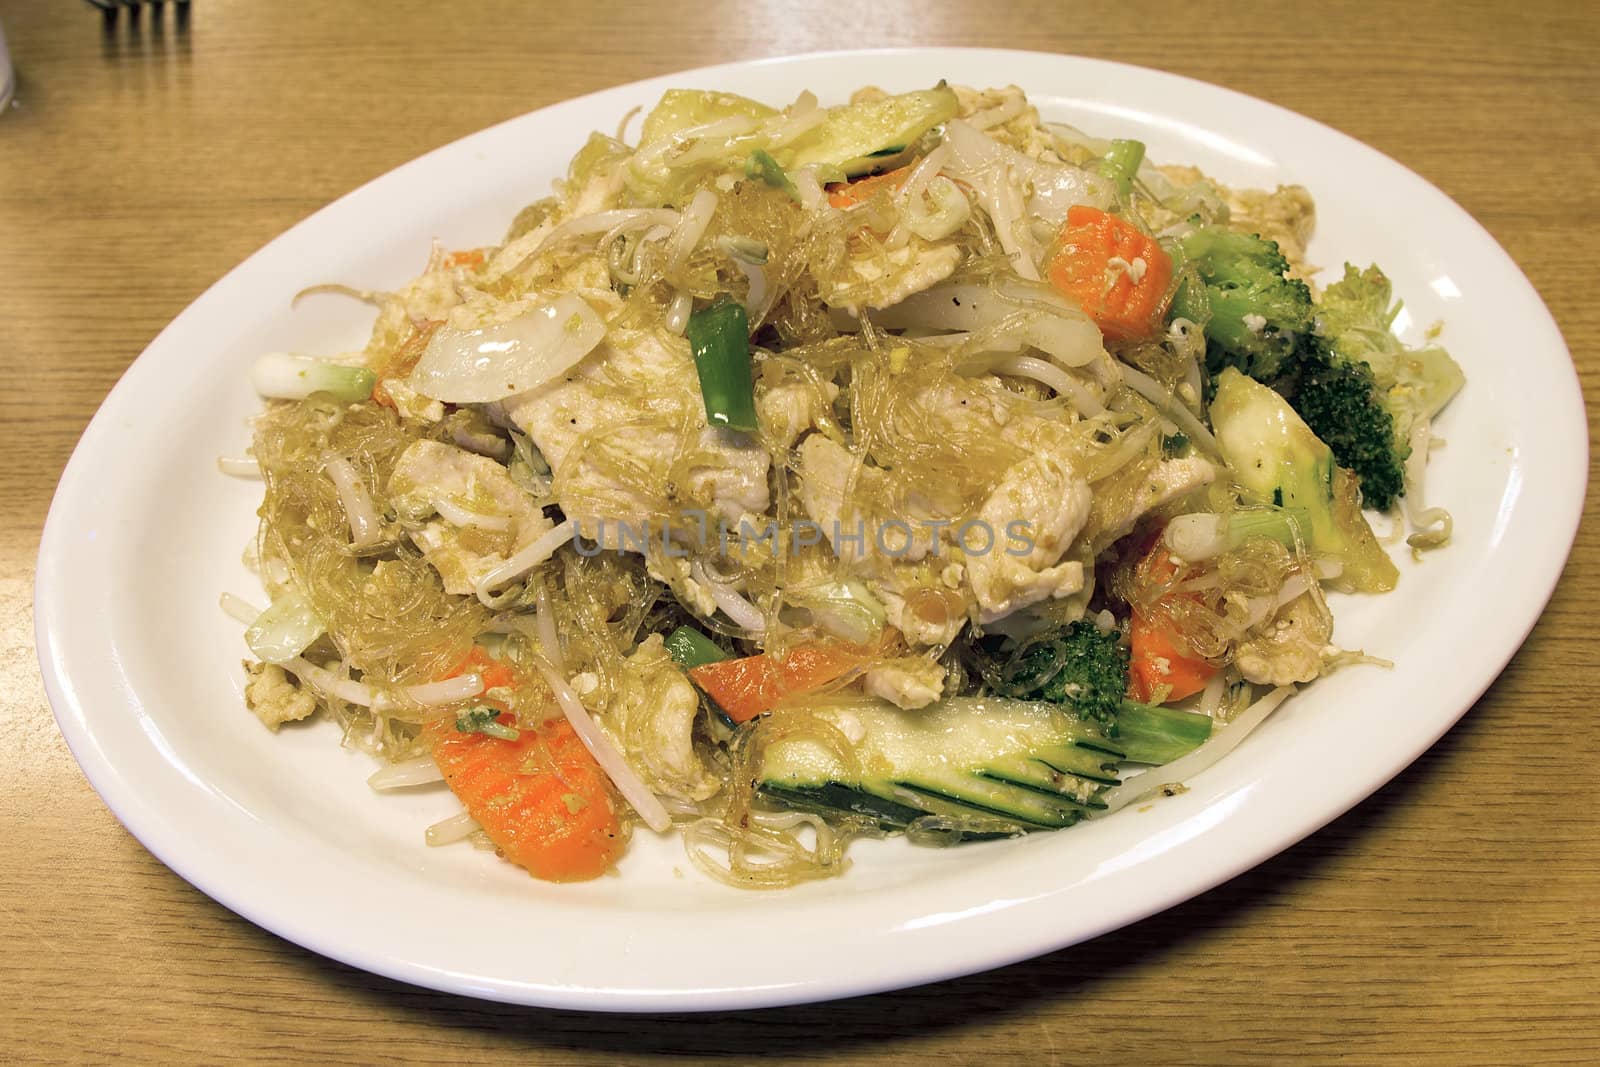 Thai Clear Bean Noodles with Chicken and Vegetables by jpldesigns